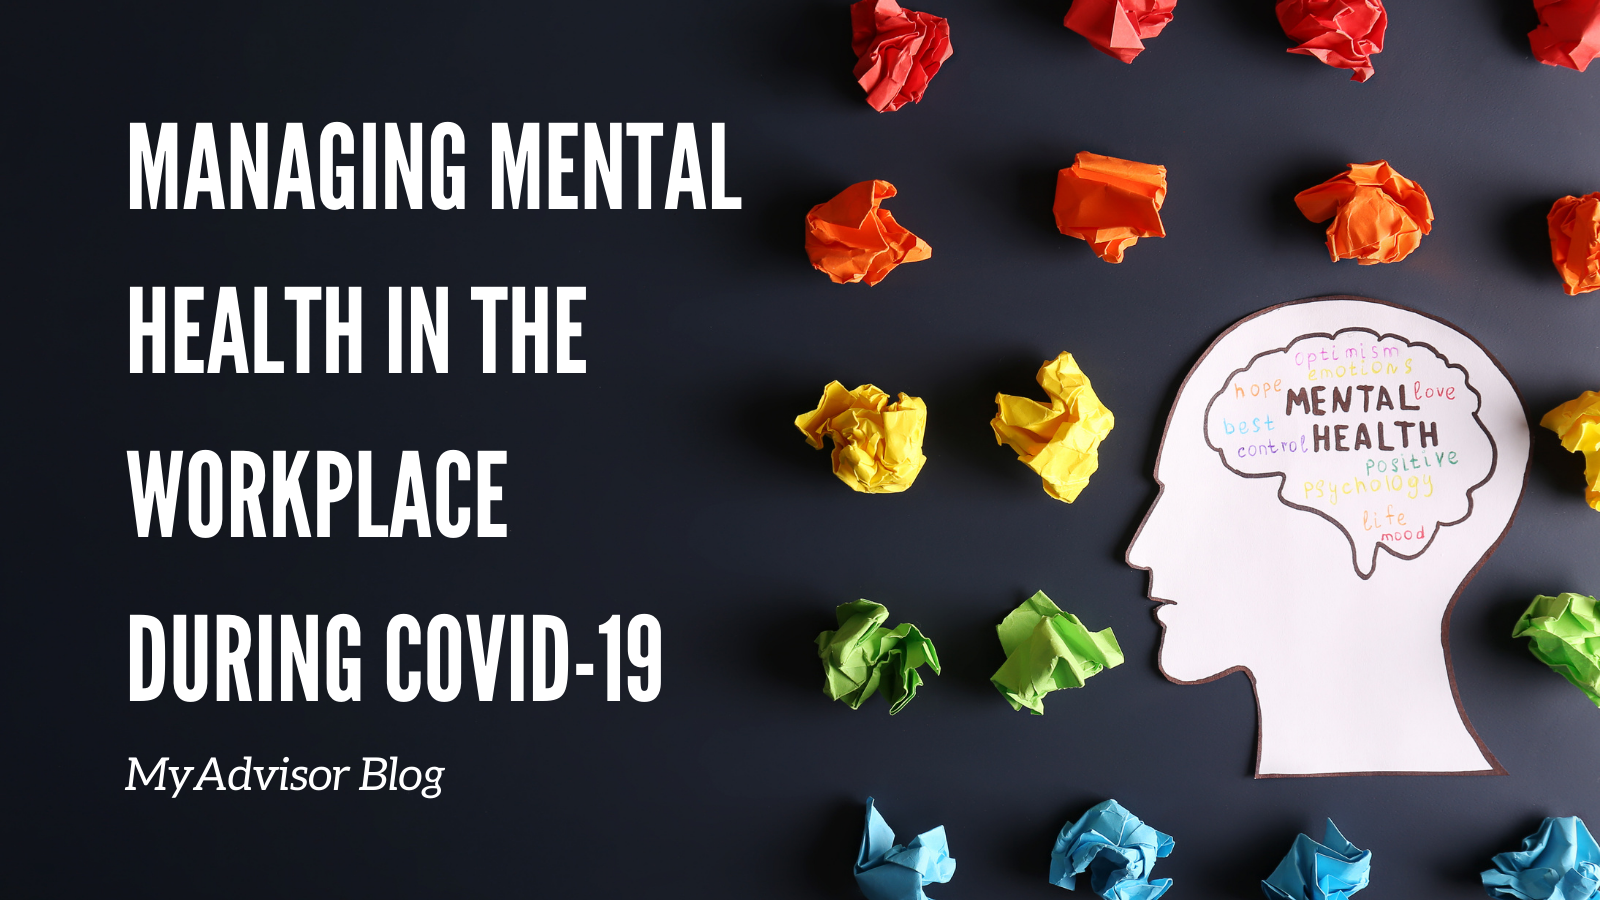 Managing mental health in the workplace during COVID-19